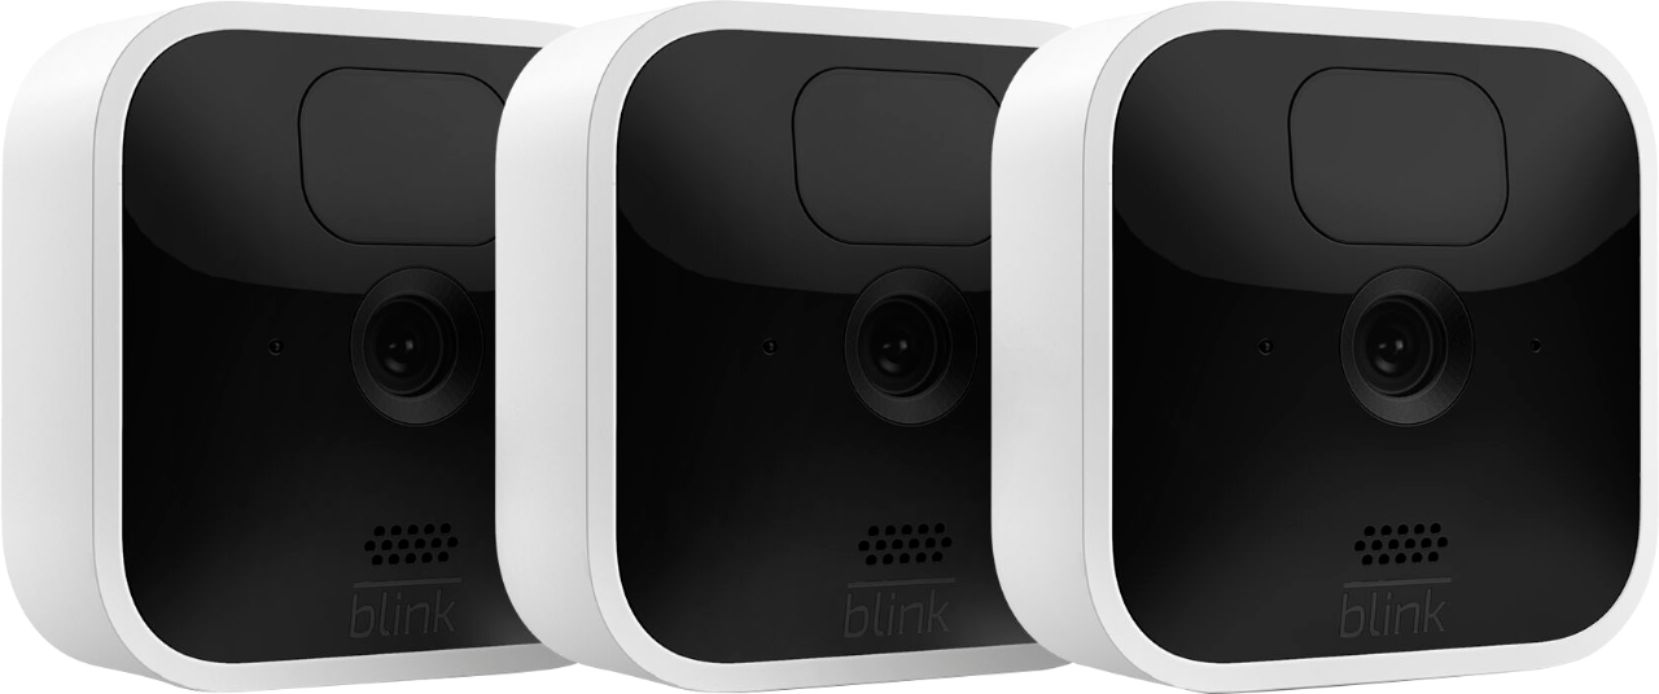 s Blink Indoor is a decent, battery-powered security camera